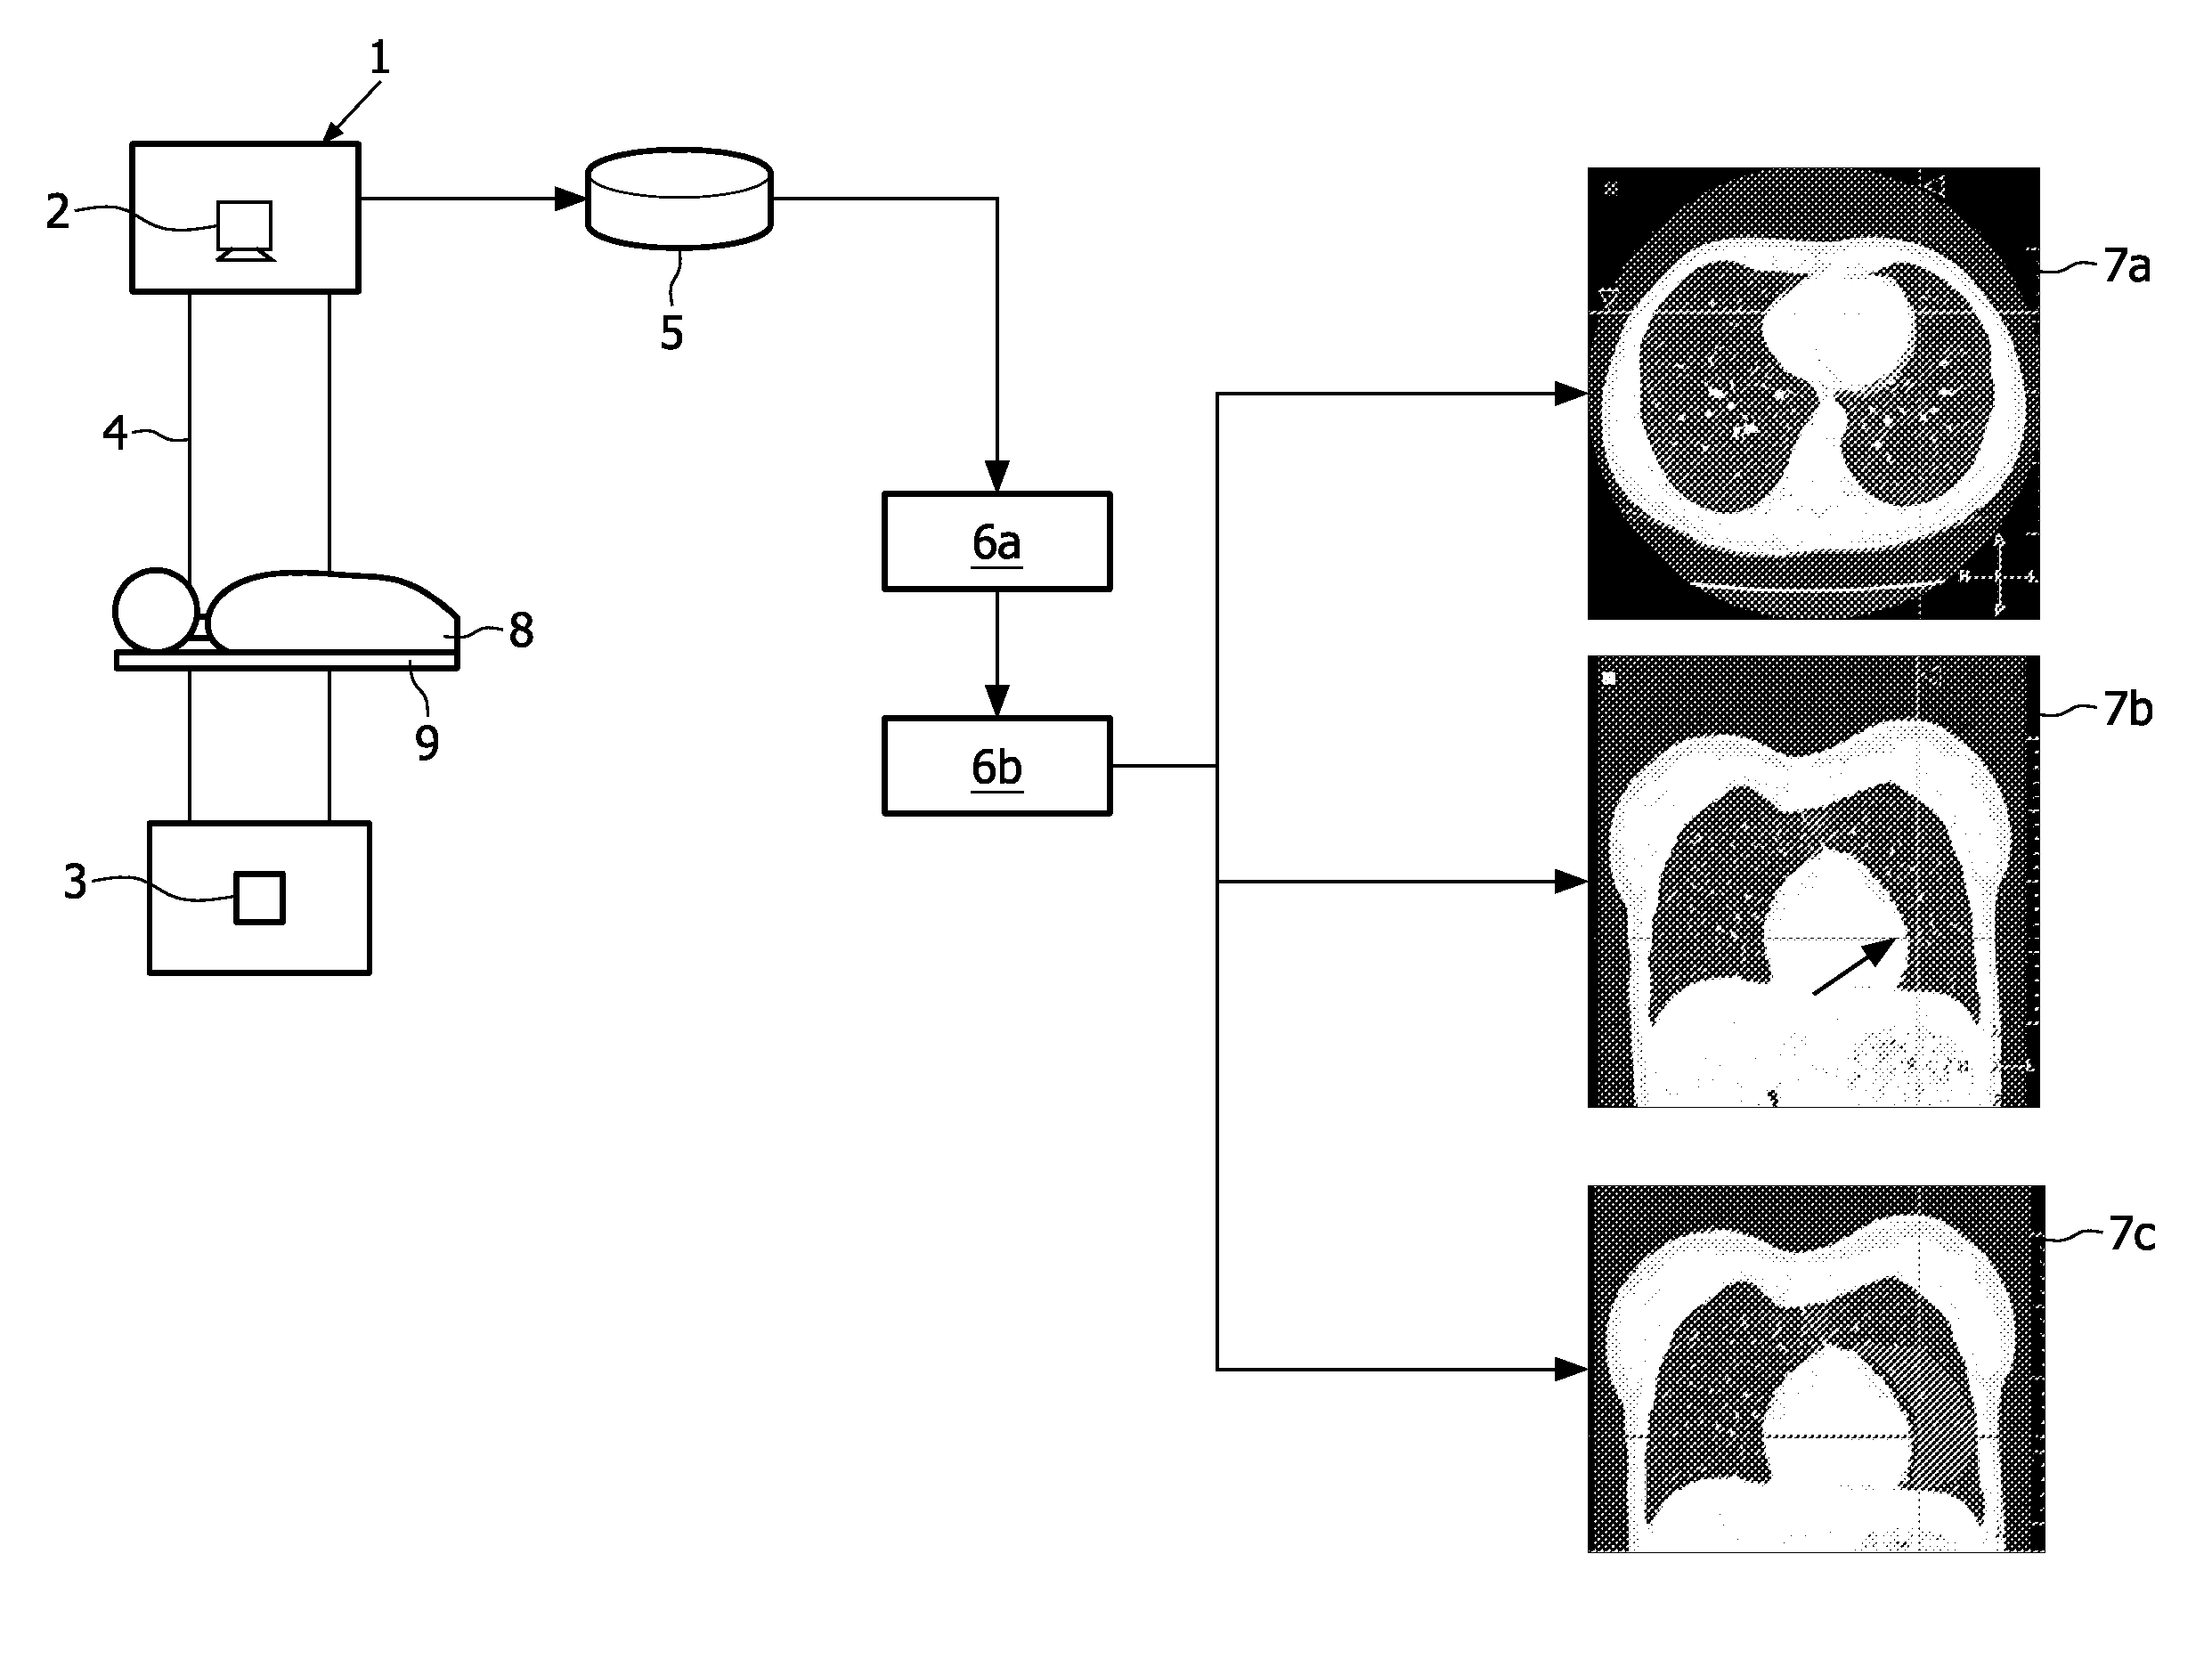 Apparatus and method for indicating likely computer-detected false positives in medical imaging data